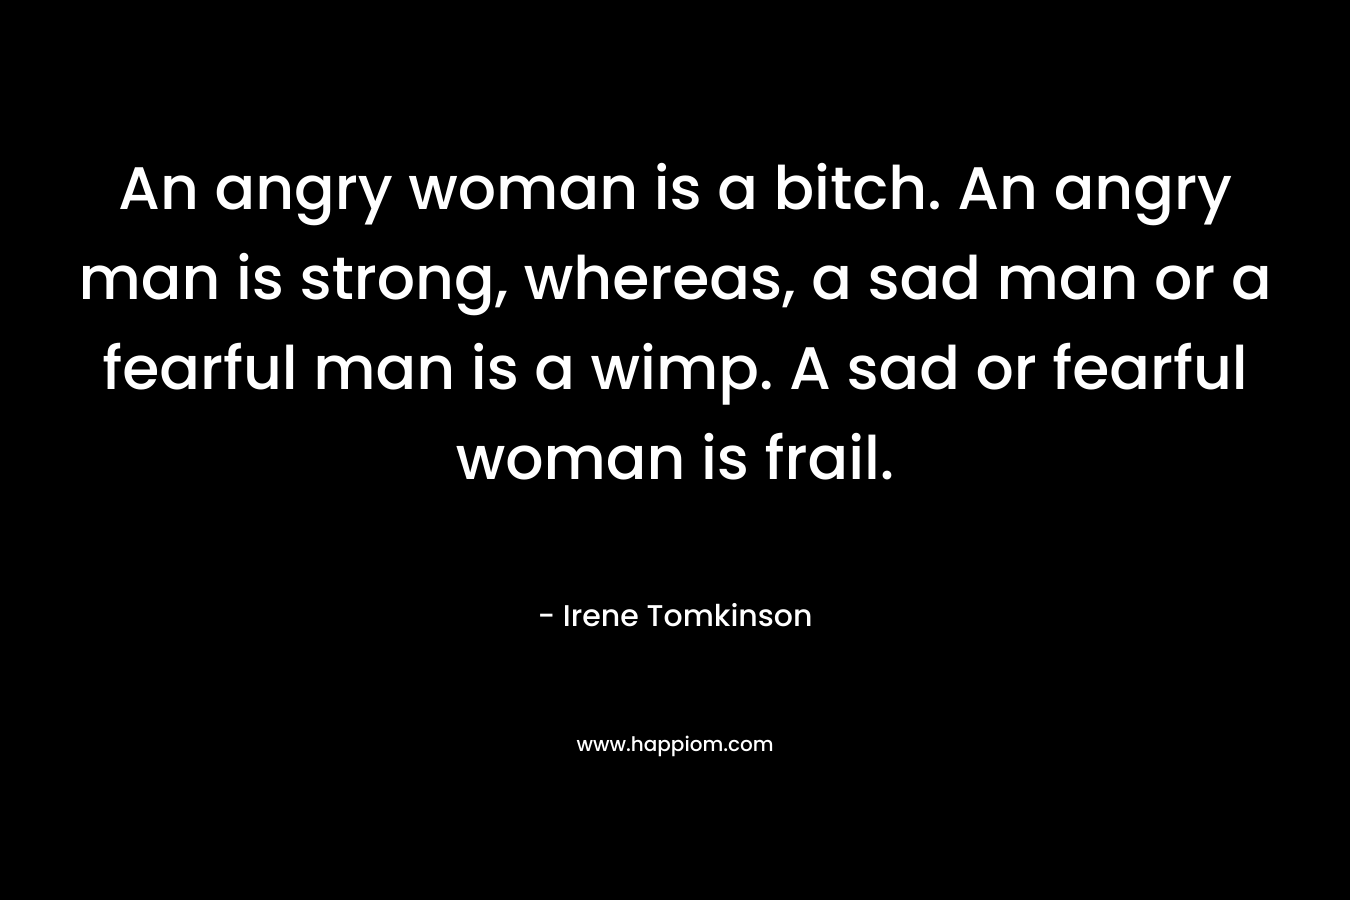 An angry woman is a bitch. An angry man is strong, whereas, a sad man or a fearful man is a wimp. A sad or fearful woman is frail.